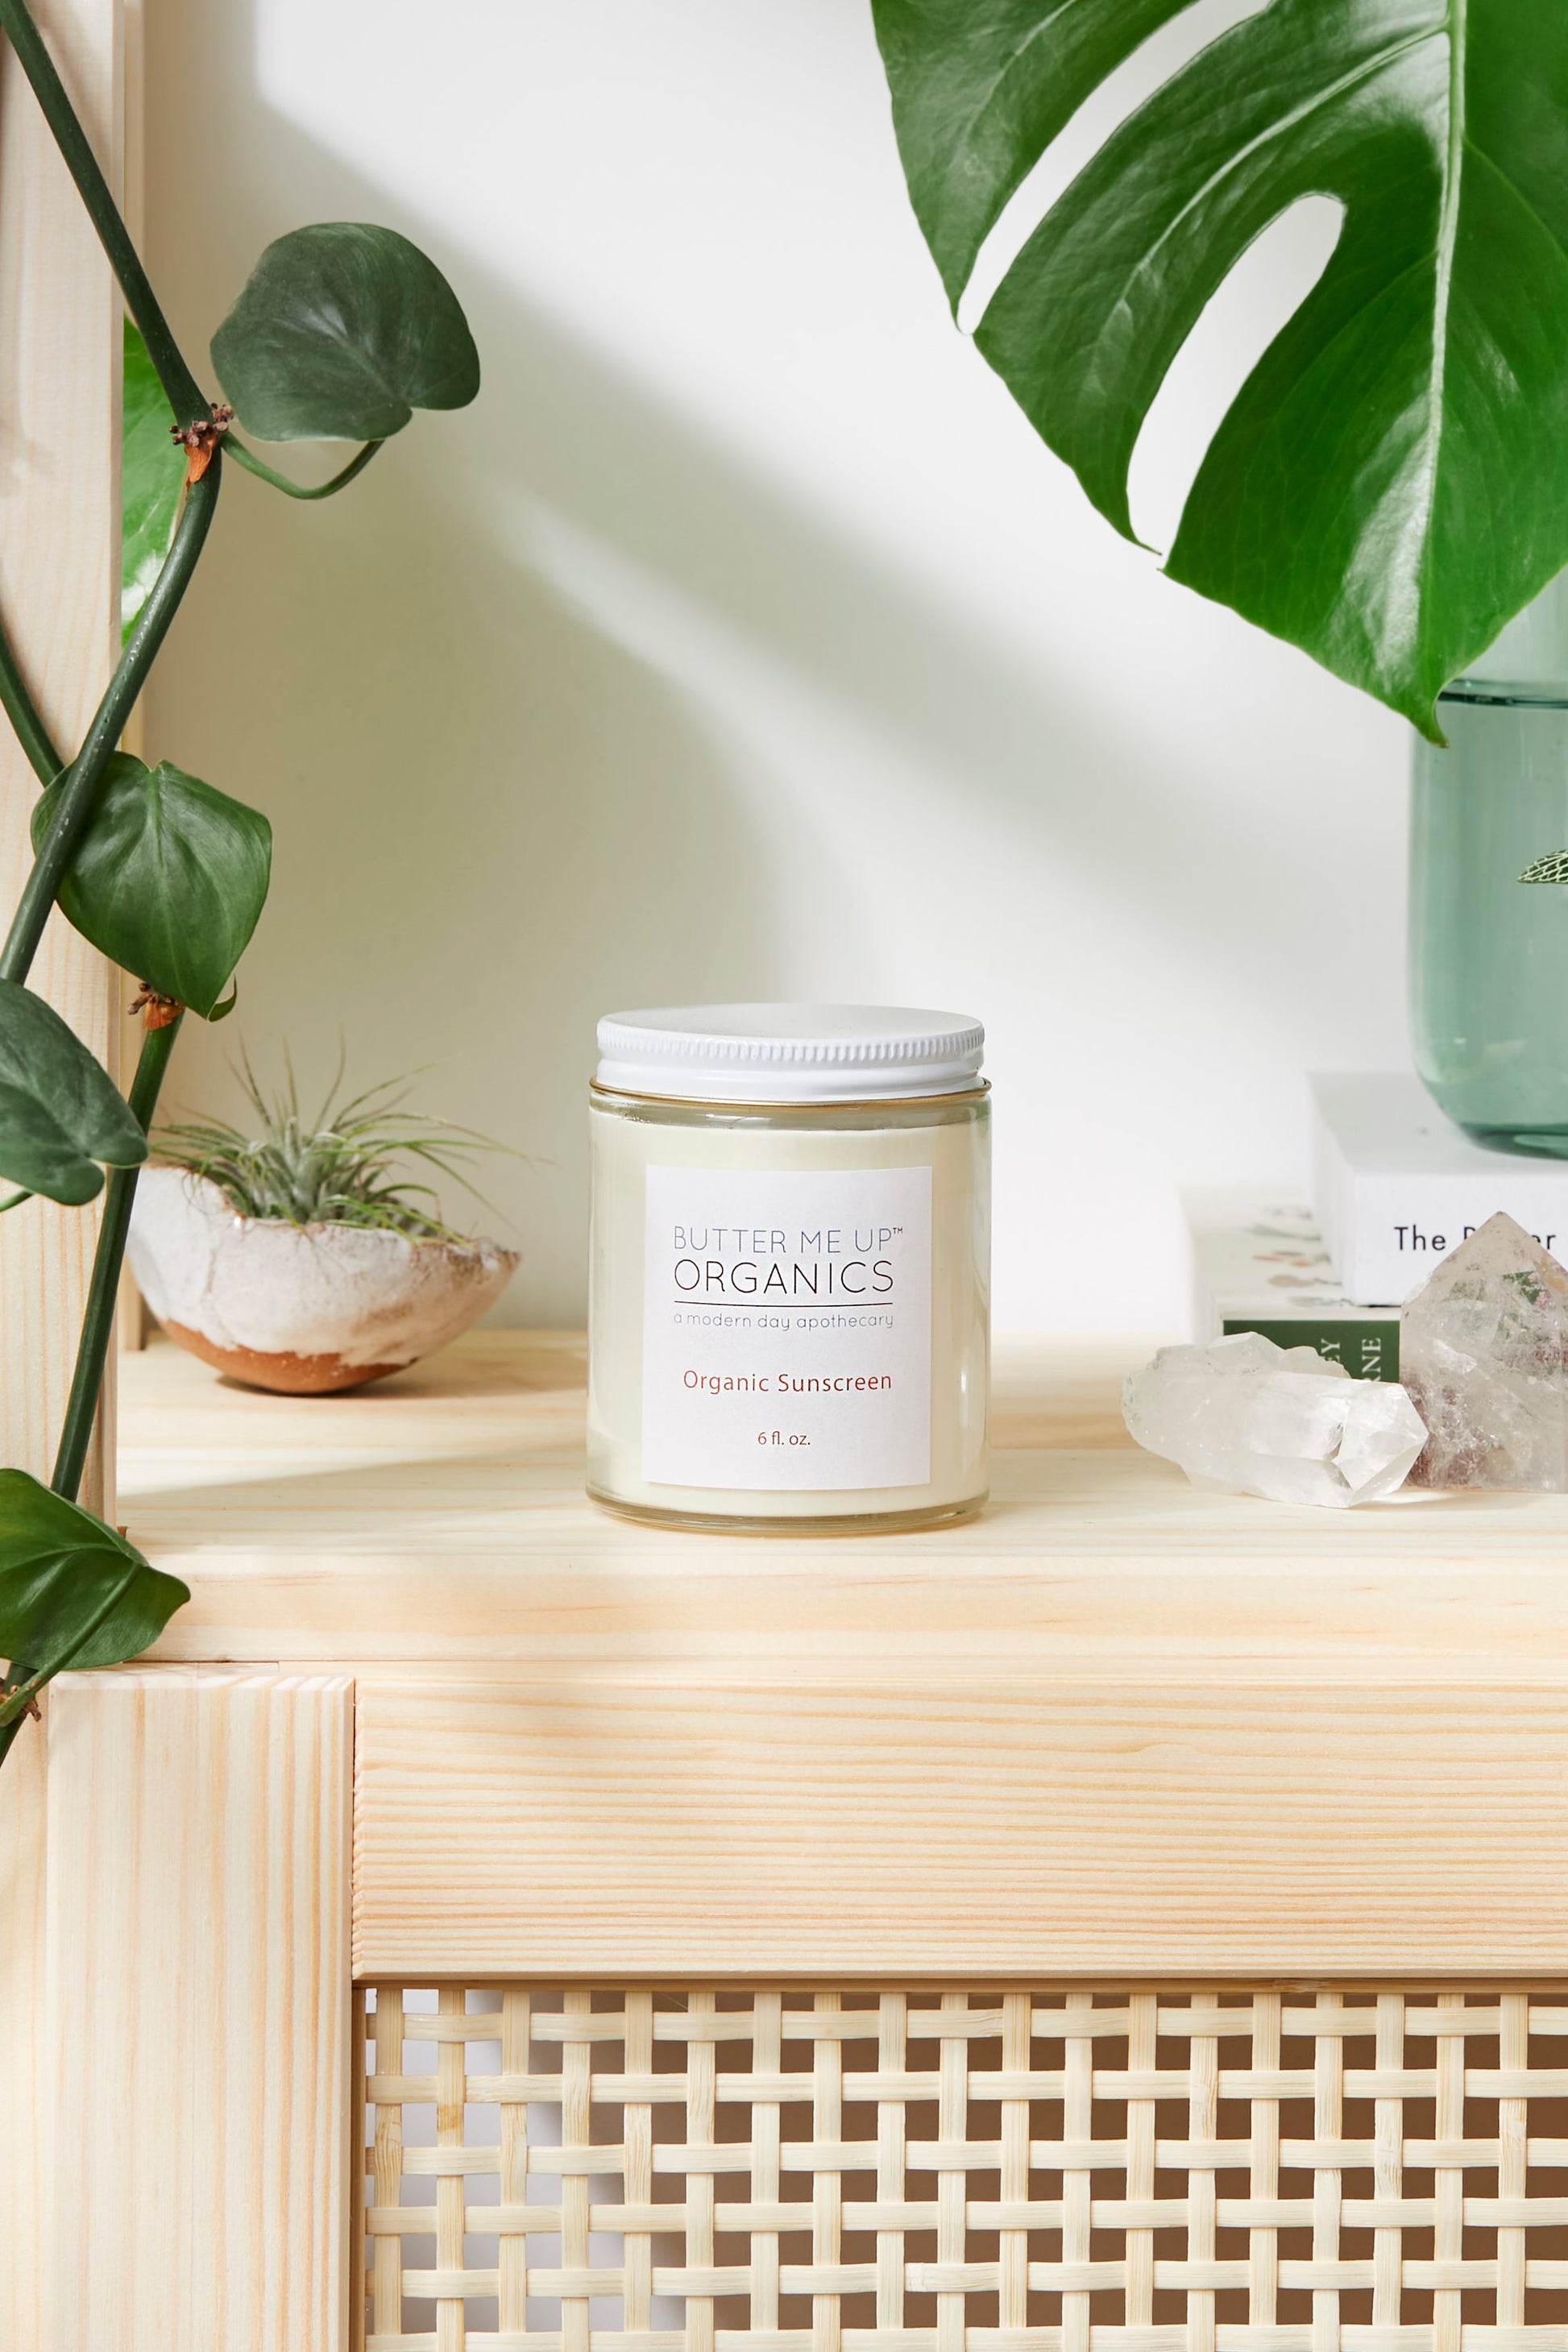 A plant sits next to a wooden shelf where a Natural Organic Sunscreen from the brand White Smokey flickers, providing a warm glow.